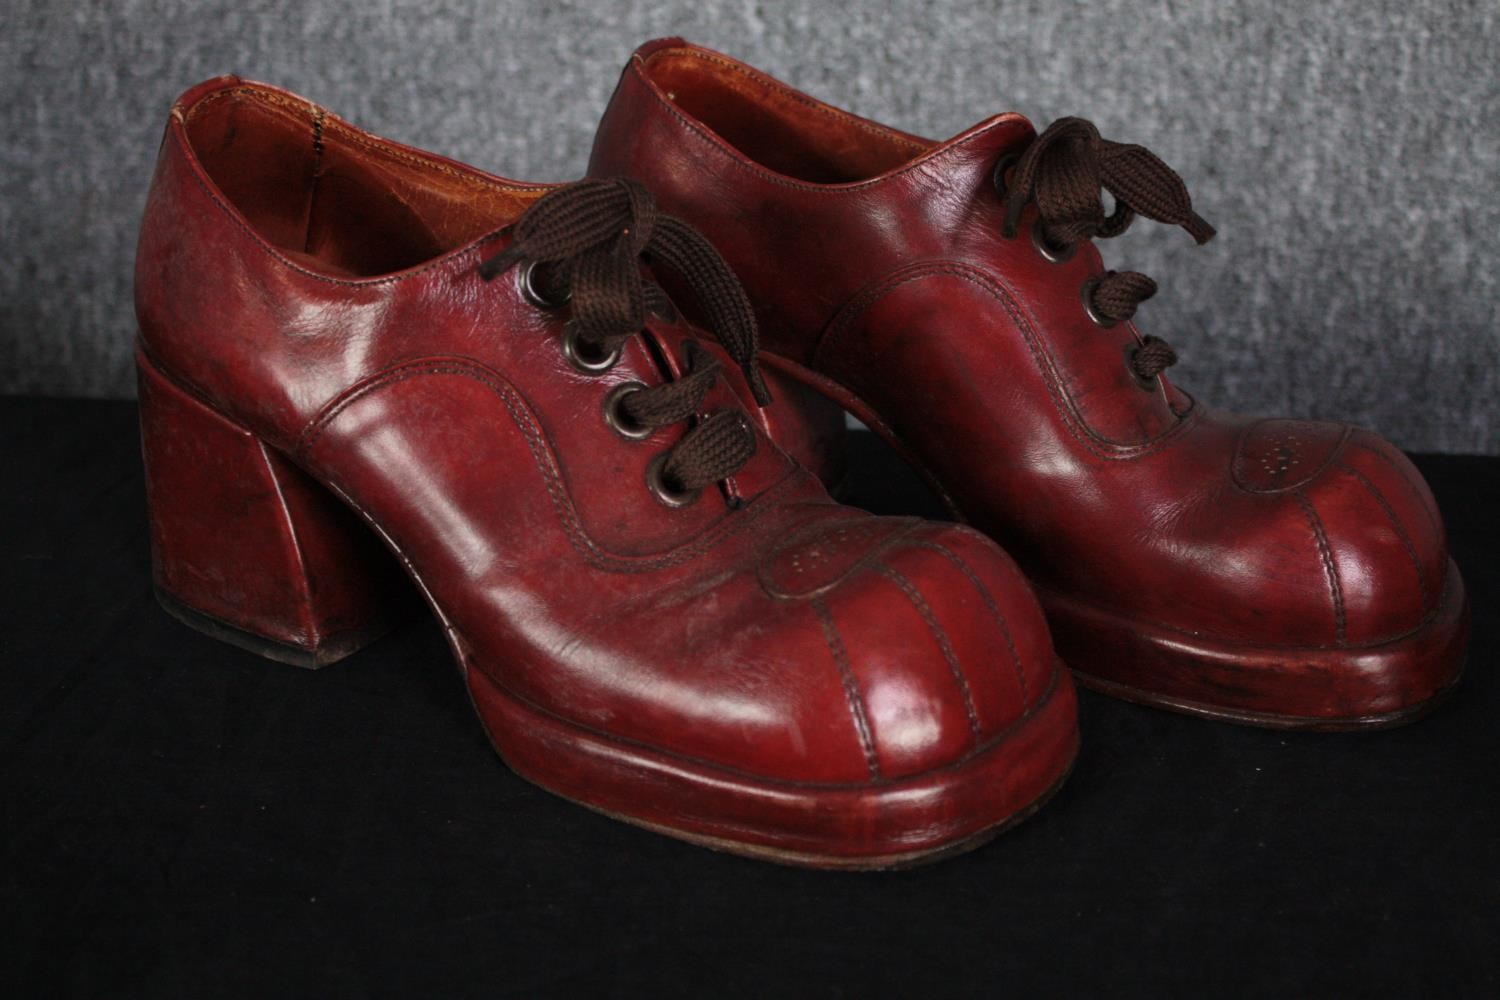 Anthony F. Richardson. Two pairs of 1970s platform high heeled shoes with their shoe trees made - Image 8 of 13